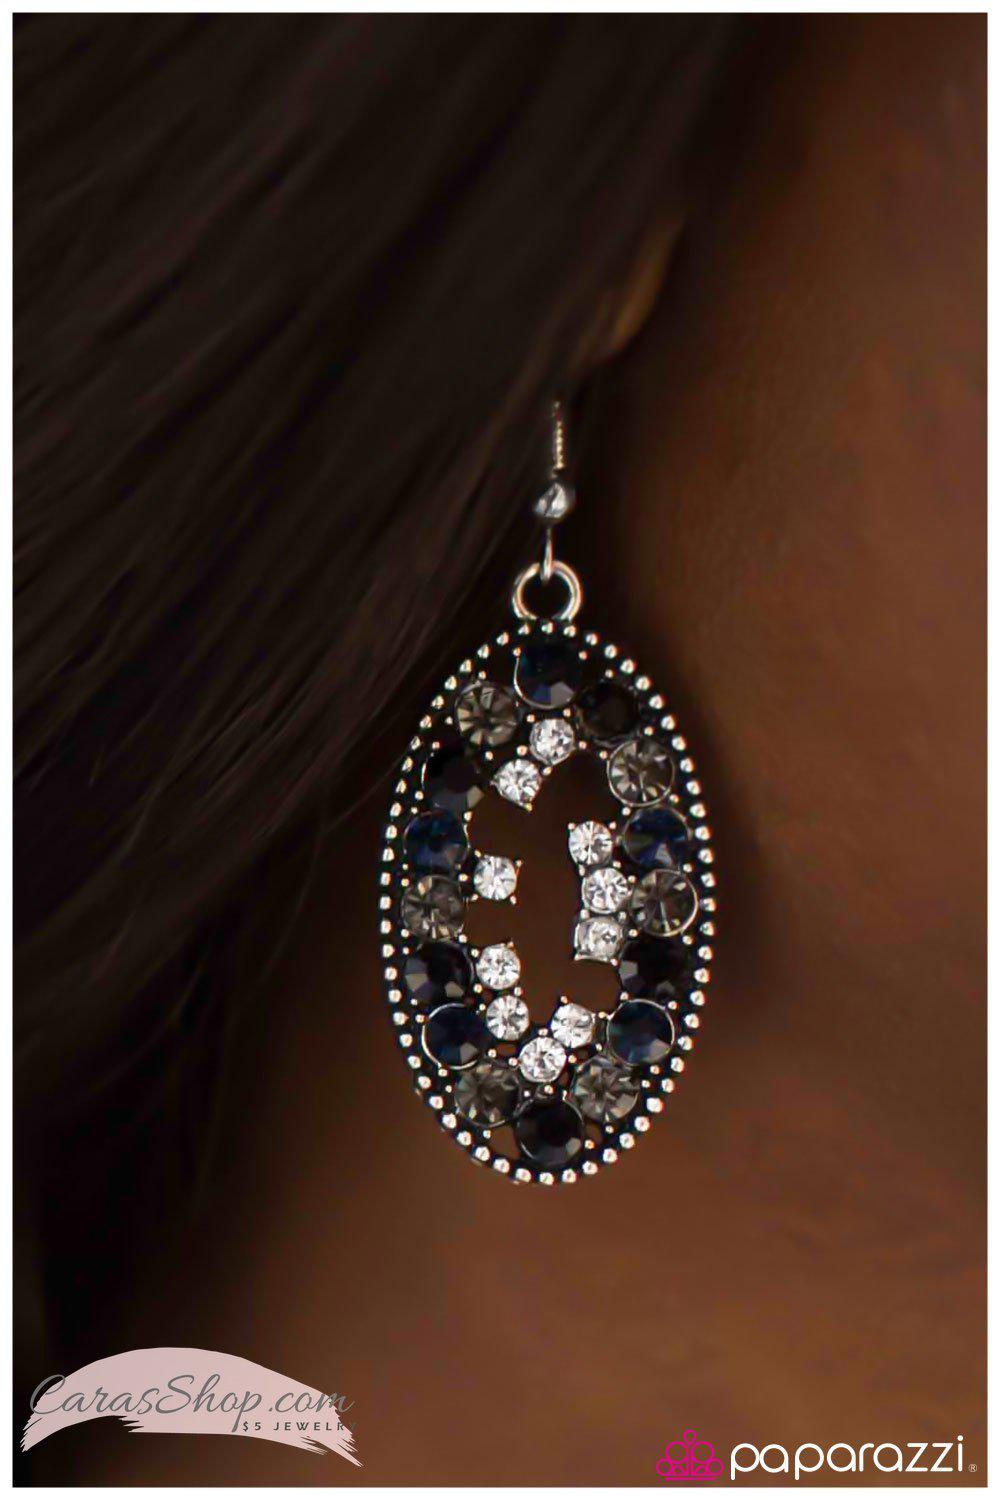 Midnight Mosaic Blue Gem Earrings - Paparazzi Accessories-CarasShop.com - $5 Jewelry by Cara Jewels